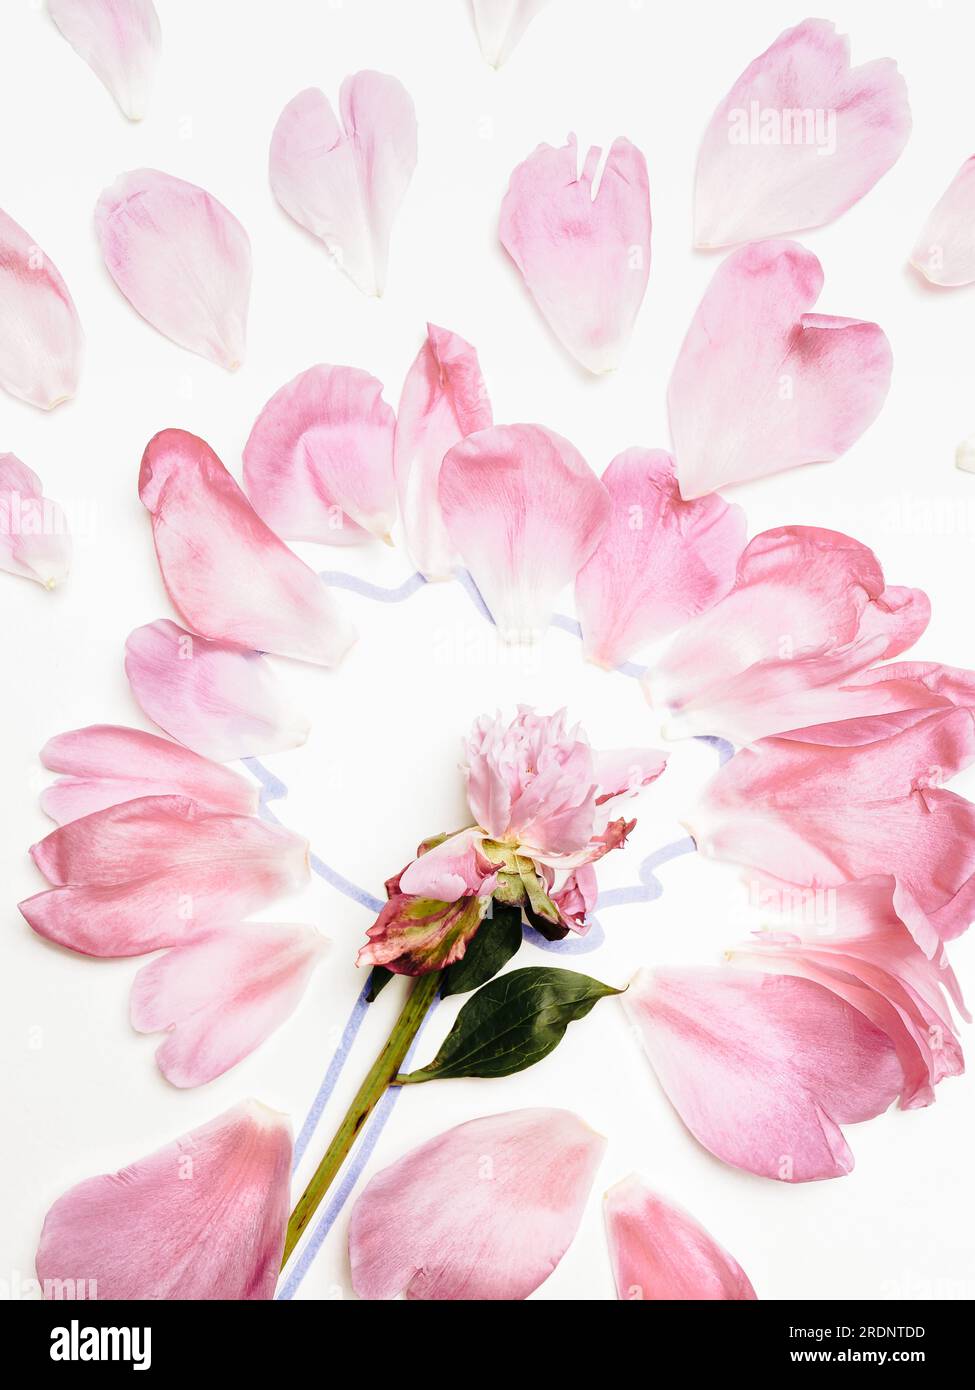 fallen peony petals on a pink background Stock Photo